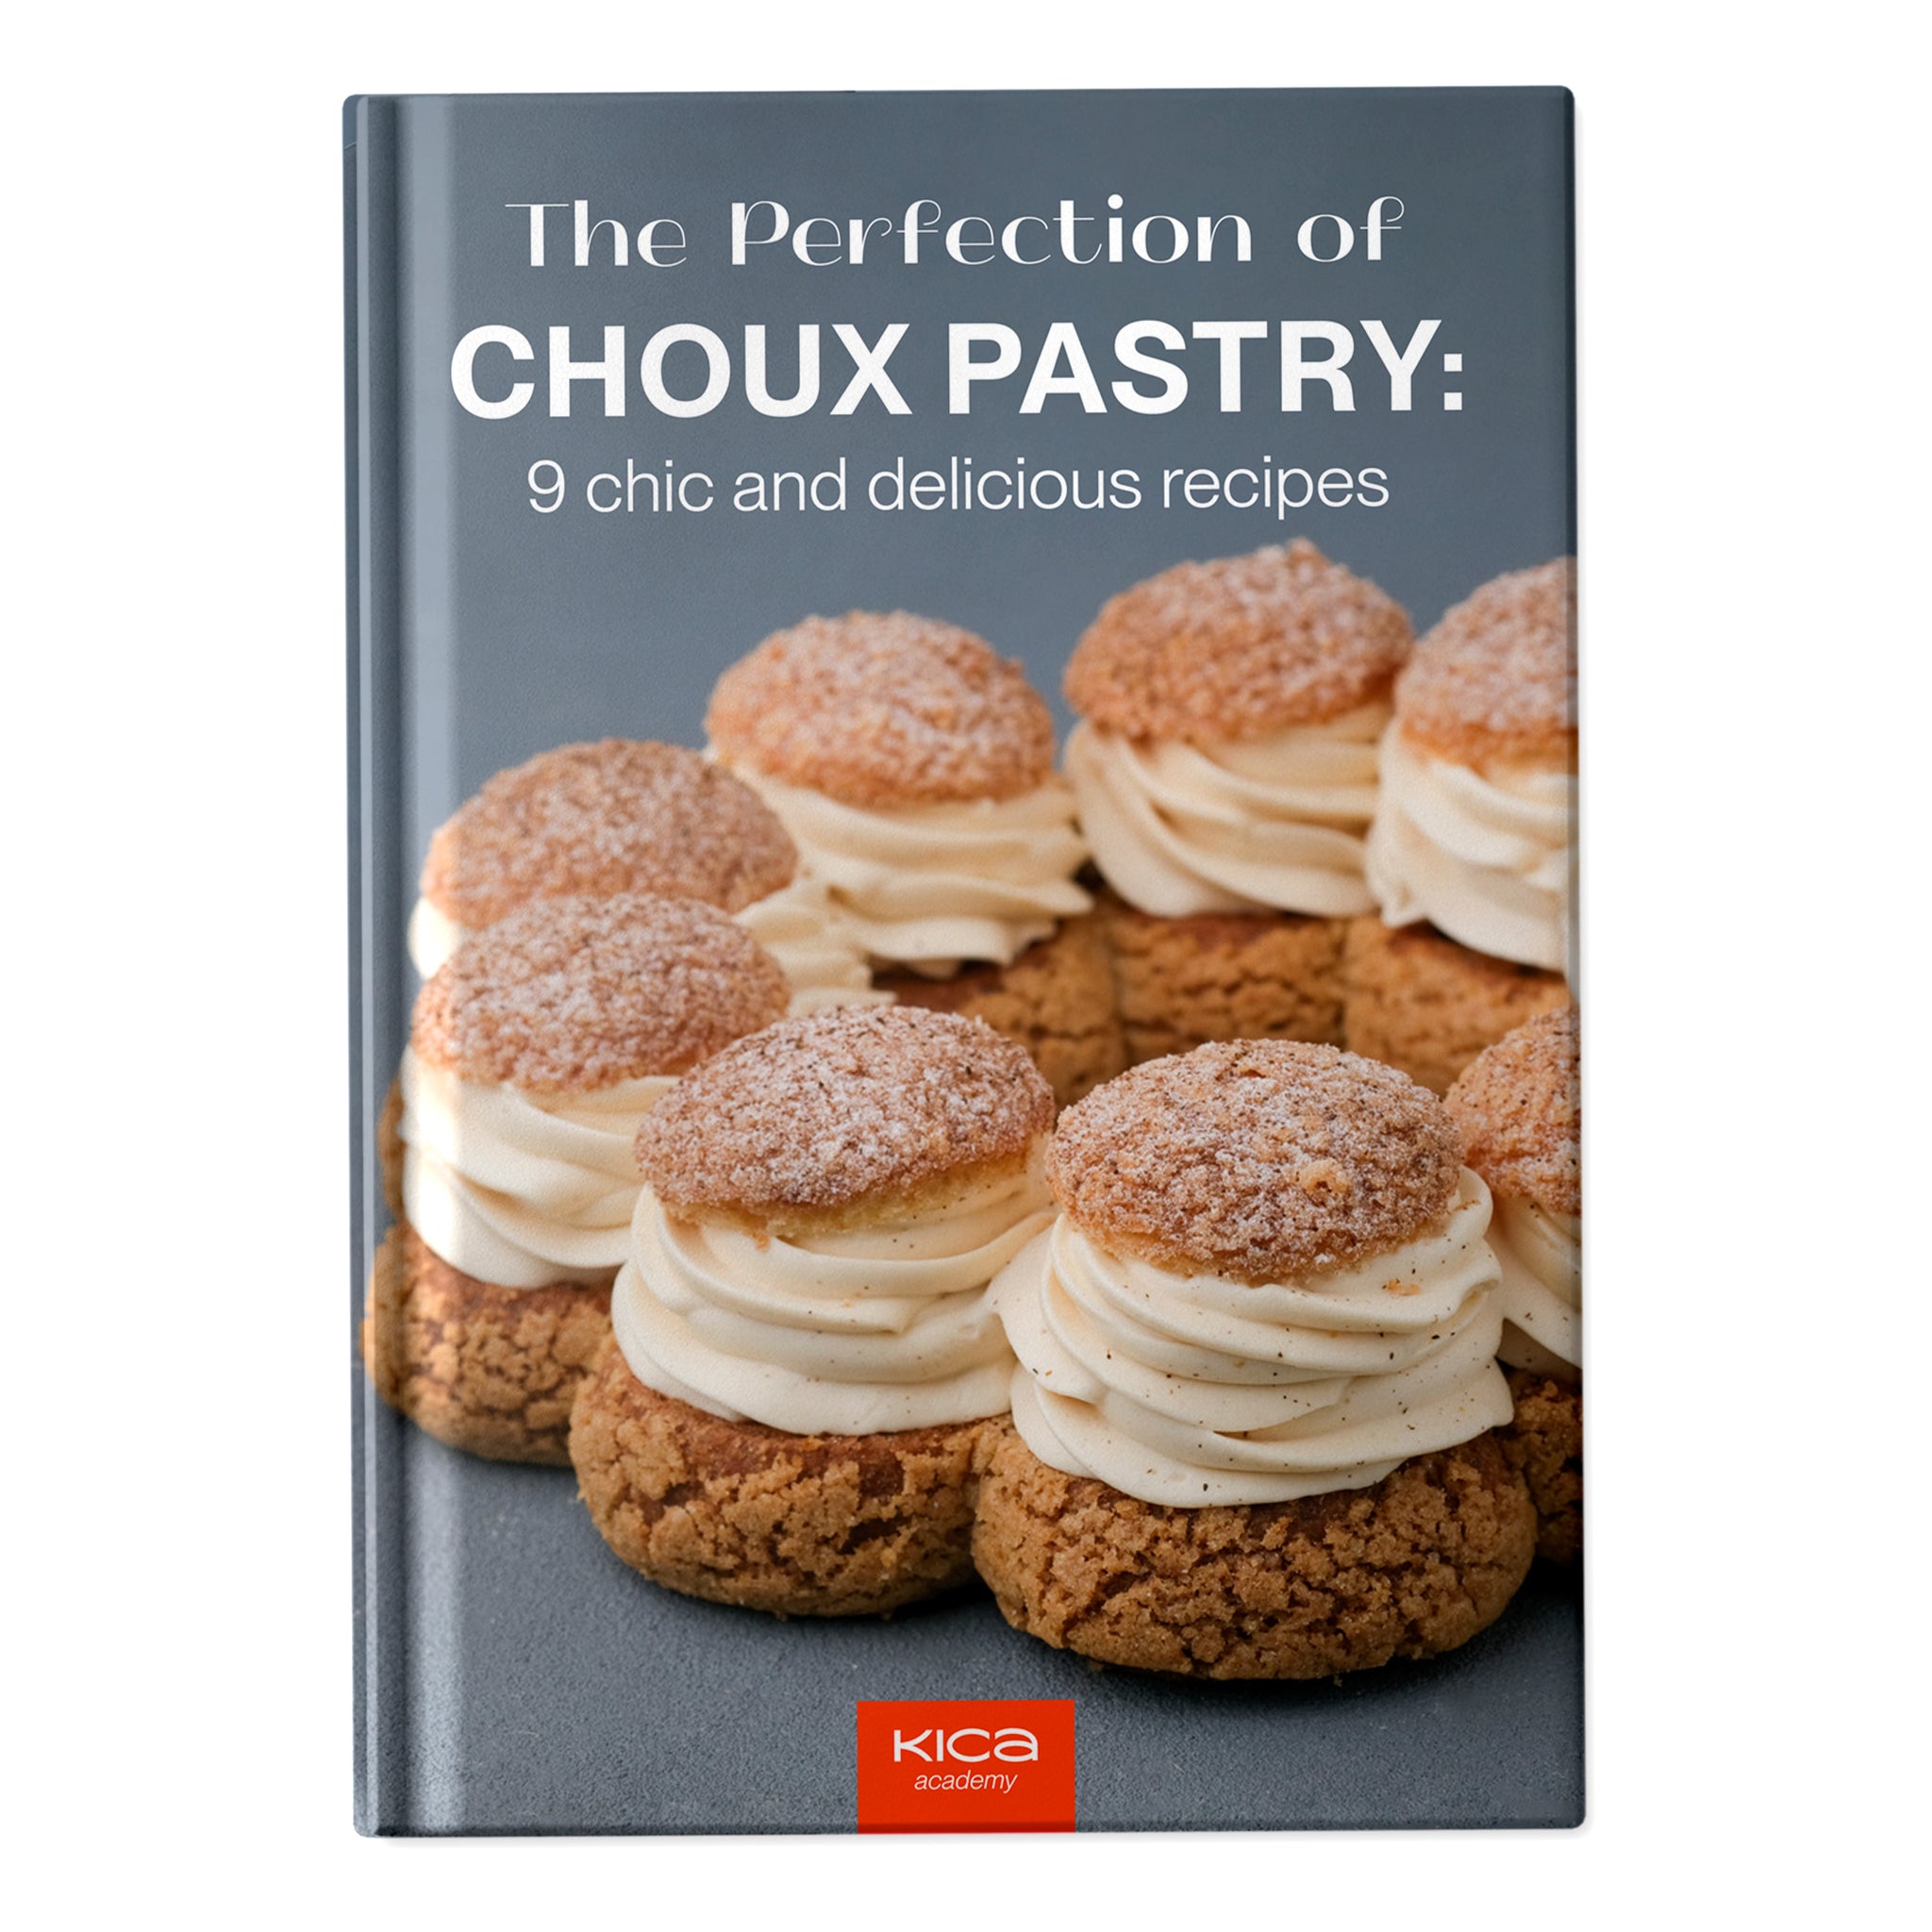 The Perfection of choux pastry